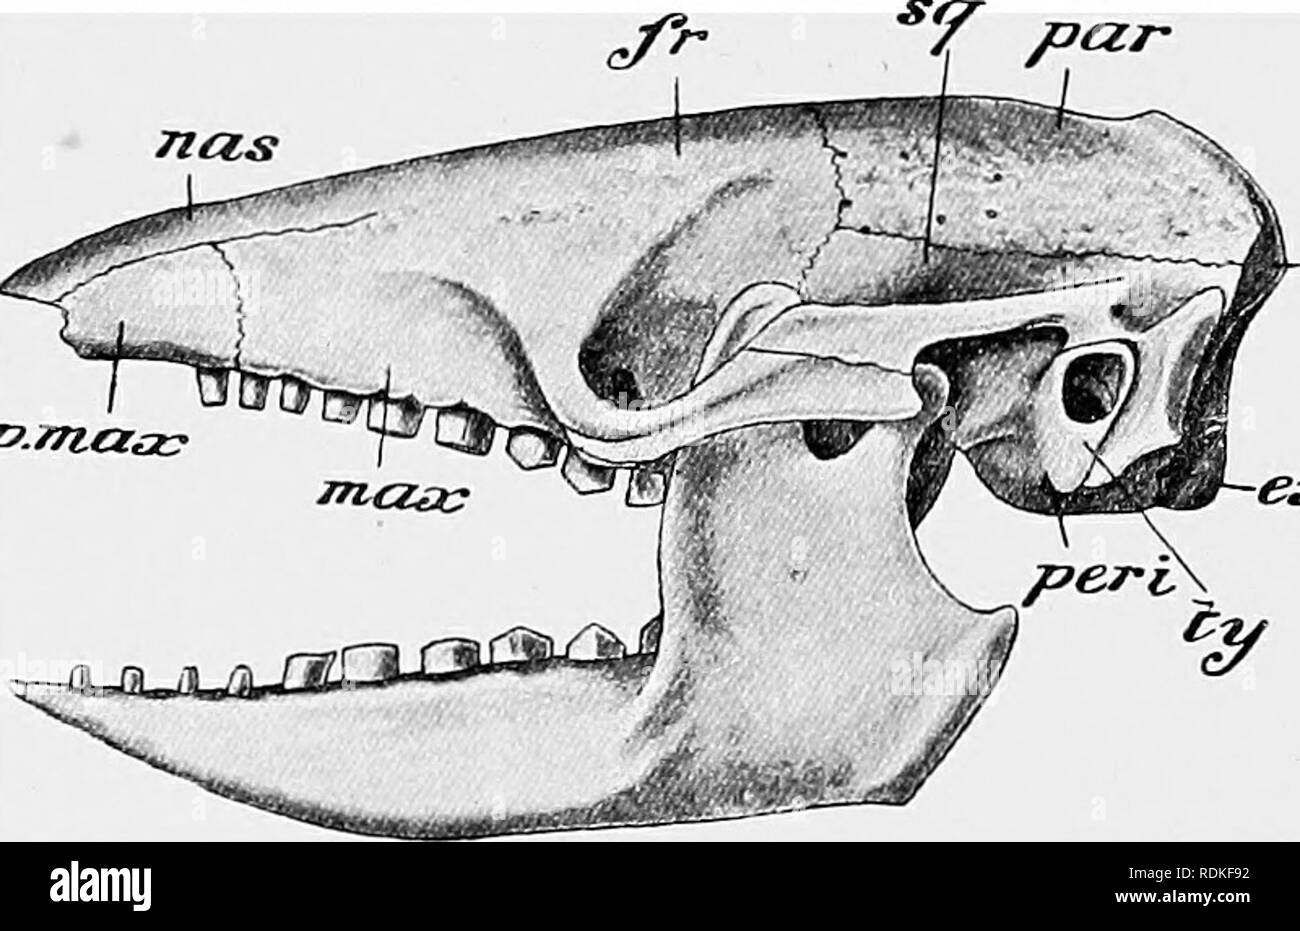 . The Cambridge natural history. Zoology. 174 SKULL OF ARMADILLOS half jaw, of which one is often ini]planted in the premaxilla. The Armadillos show their alliance with the other American Edentates in the points enumerated above. Their teeth specially ally them to the Sloths, while the sali'ary and digestive organs generally are on the Anteater plan, hut present a less extreme development. There are, however, caeca, paired as in birds, in the genera Dasypus and Ghlaviydoploorus. The others have none. But there is a dilatation at the commencement of the large intestine, which is not very diffe Stock Photo